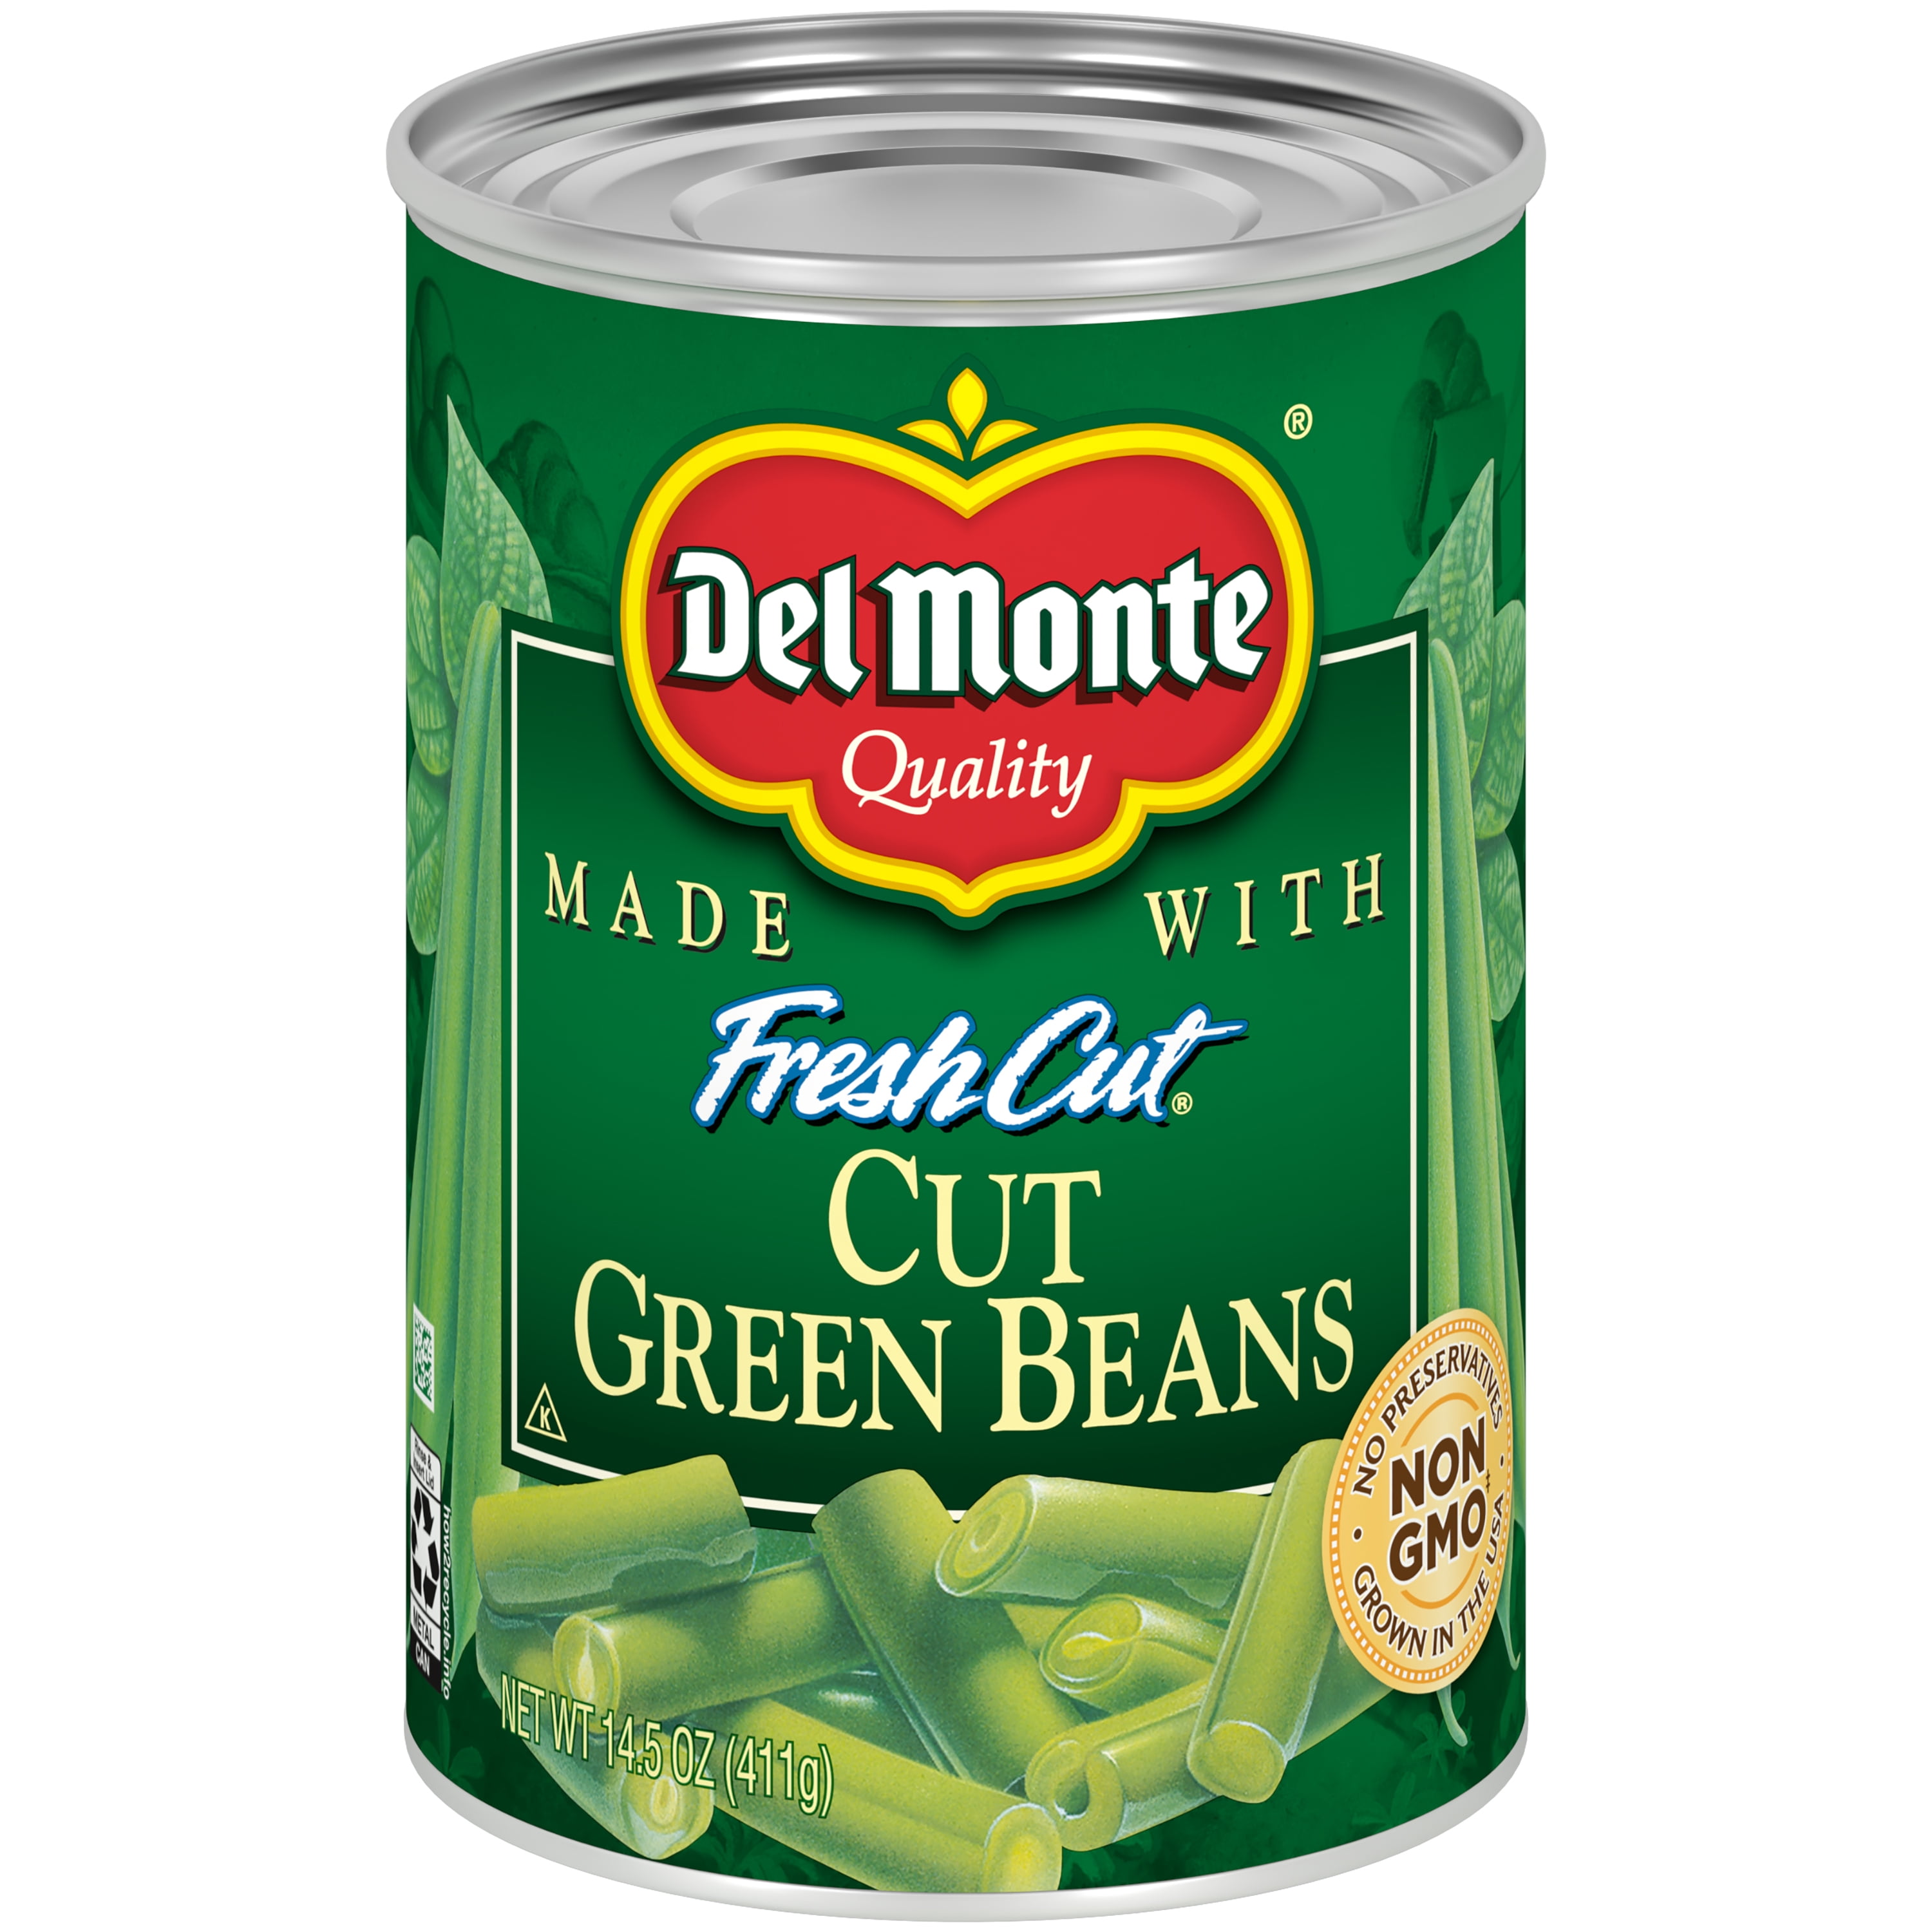 Are Canned Green Beans Bad For Dogs